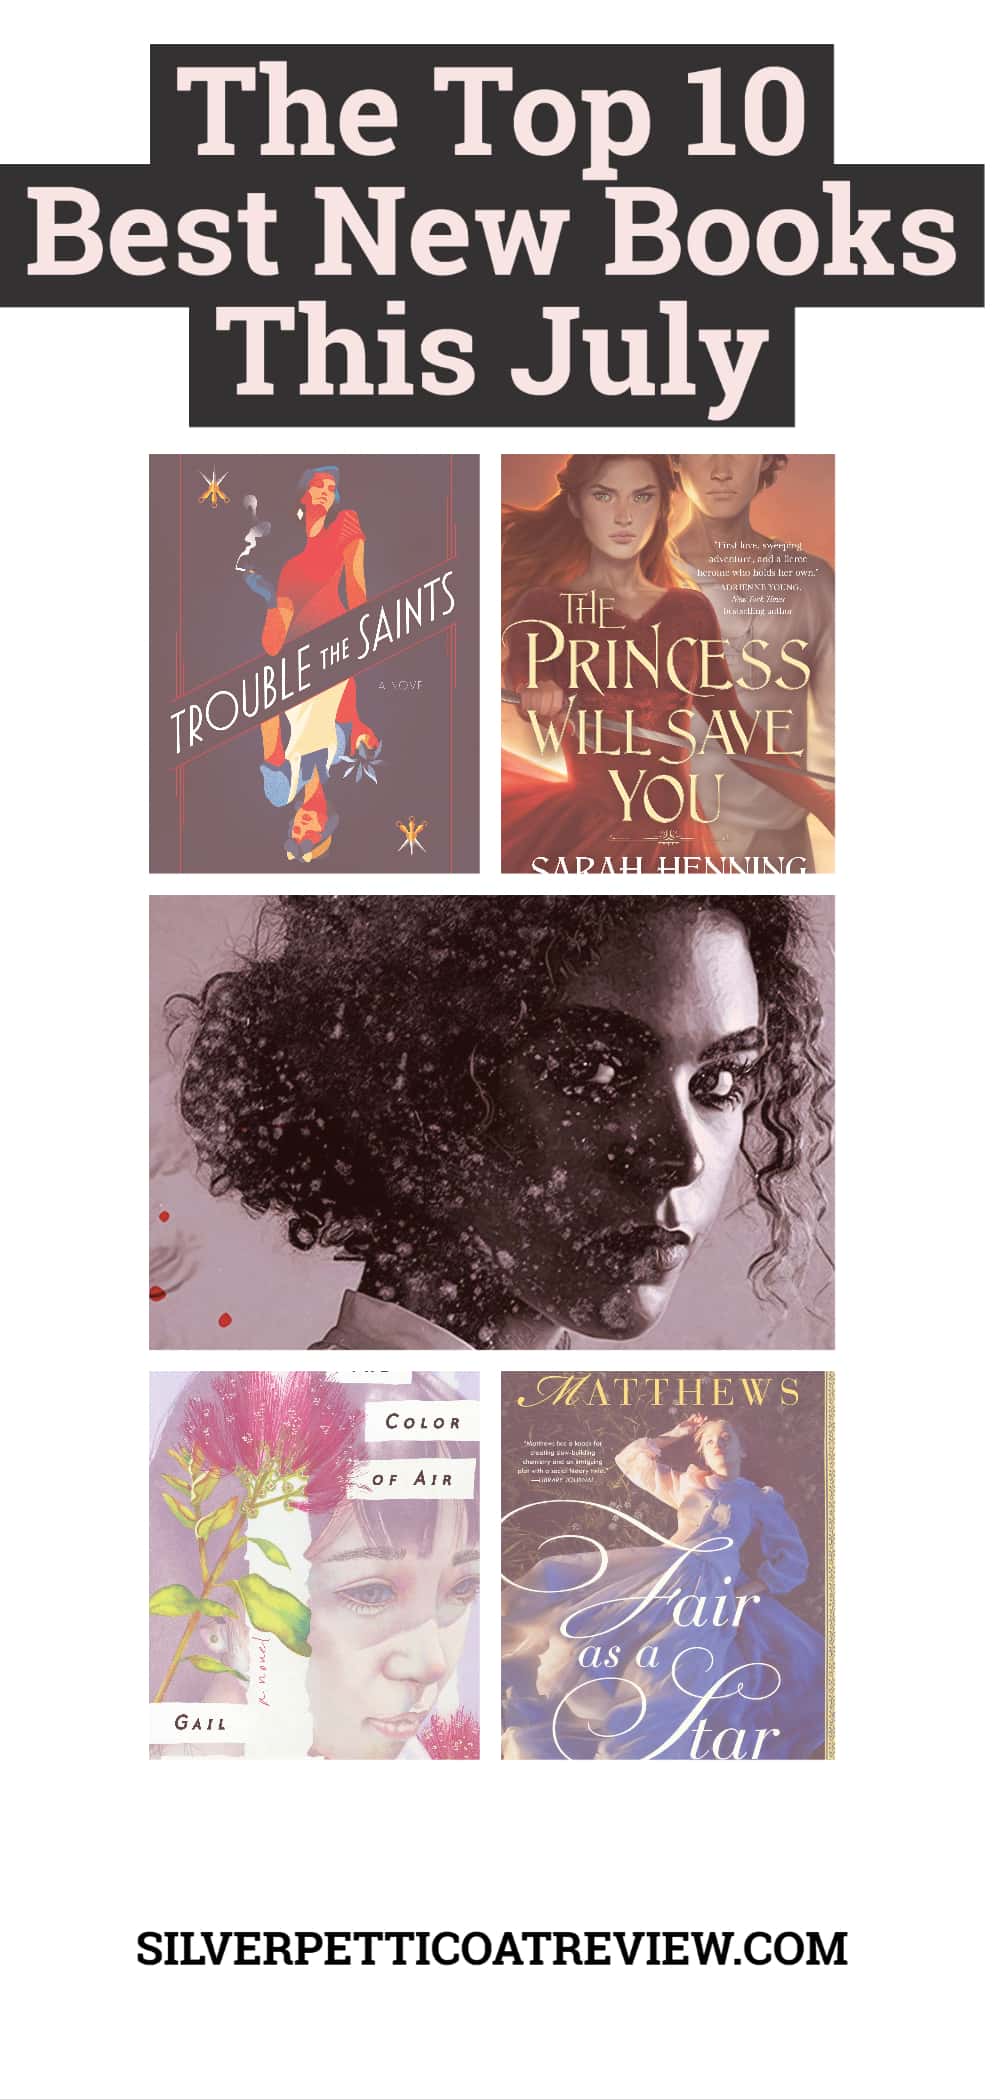 The Top 10 Best New Books This July Pinterest Image